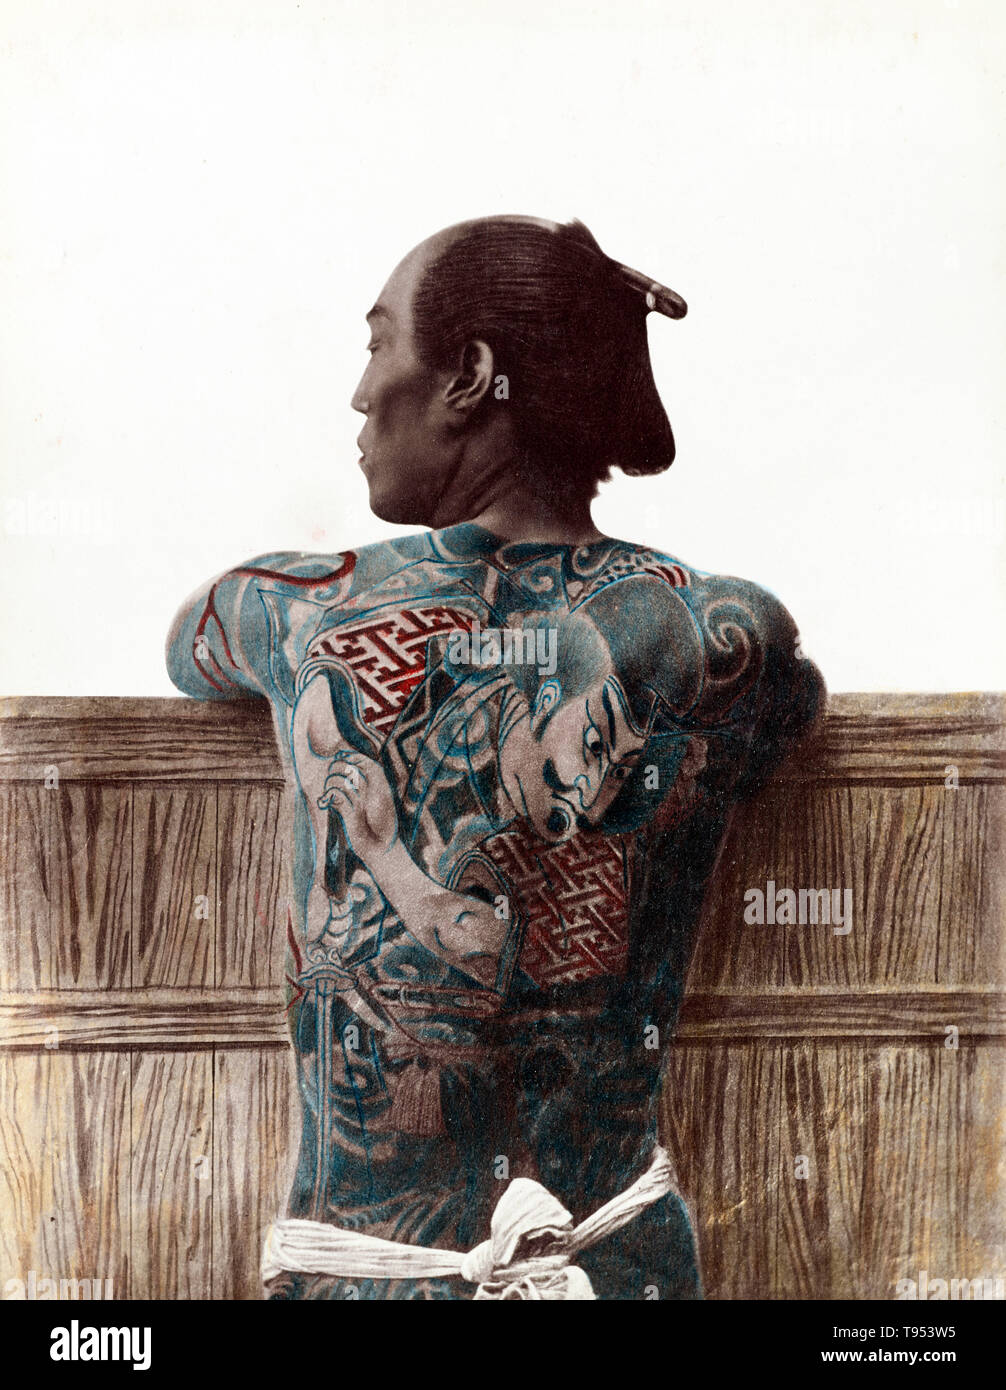 Japanese man with full-body tattoo, from c. 1870s - 1890s. Photographed by Kusakabe Kimbei (Japanese, 1841 - 1934, active 1880s - about 1912) or Baron Raimund von Stillfried (Austrian, 1839 - 1911). Hand-colored albumen silver print. Stock Photo